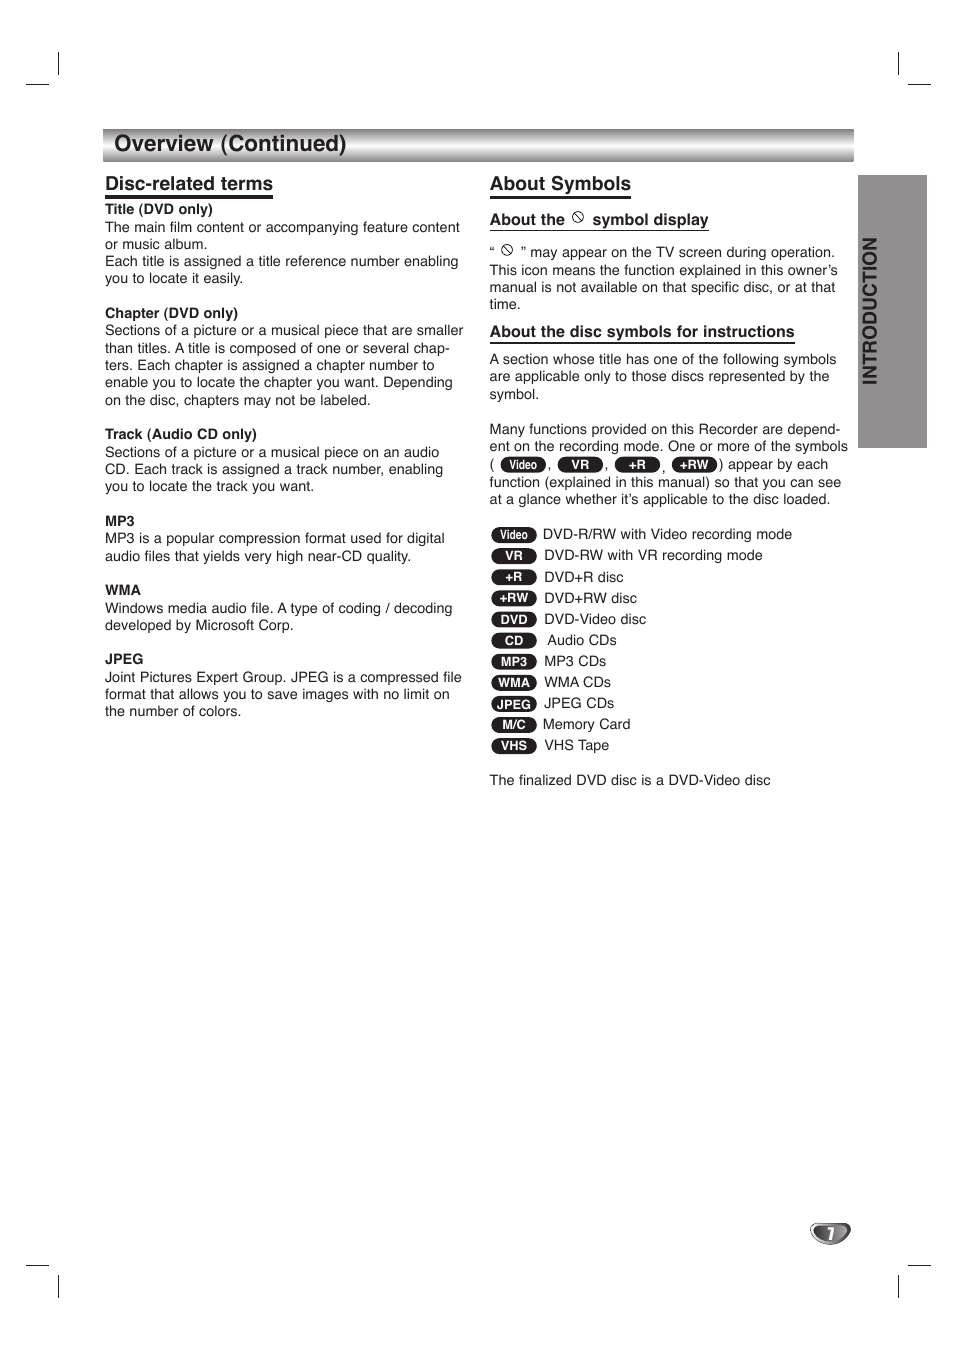 Overview (continued), Disc-related terms, About symbols | Introduction | LG LHY-518 User Manual | Page 7 / 75